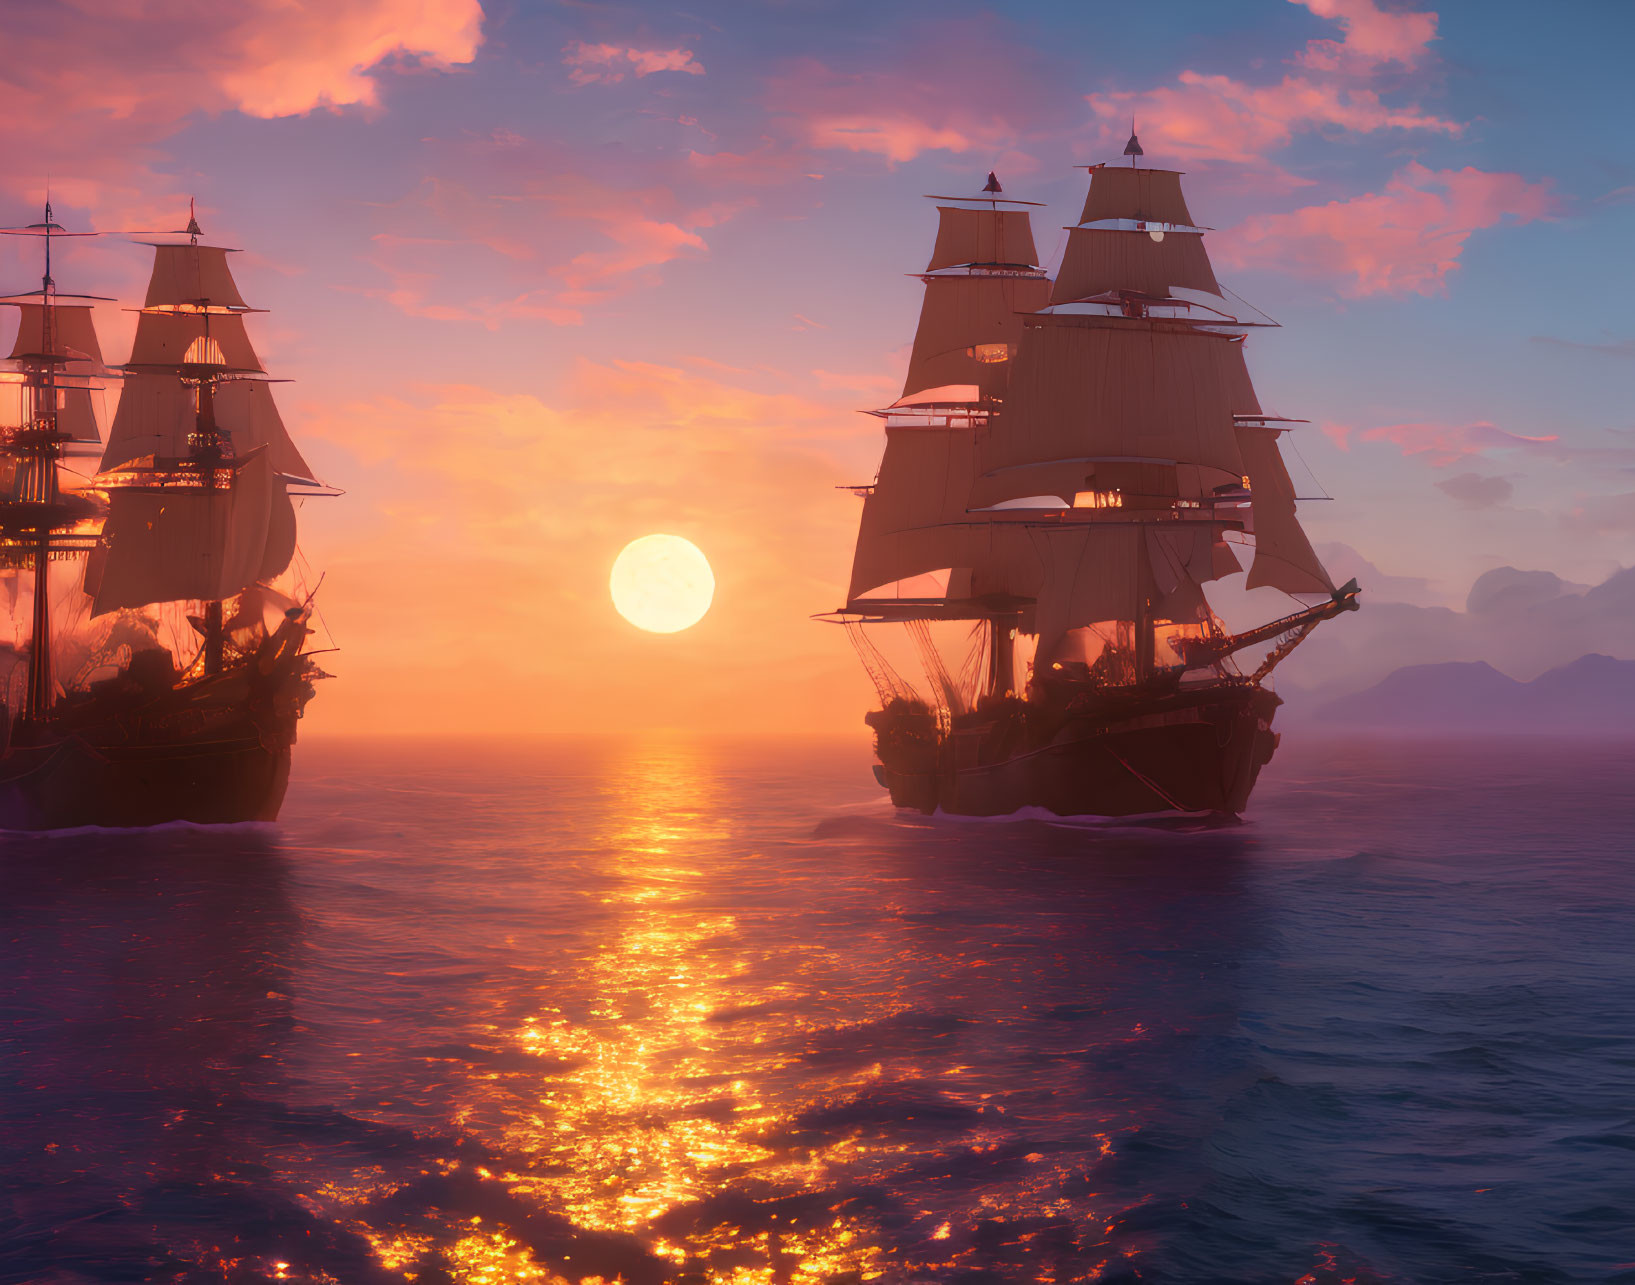 Sailing ships on tranquil sea at sunset with vivid orange sky